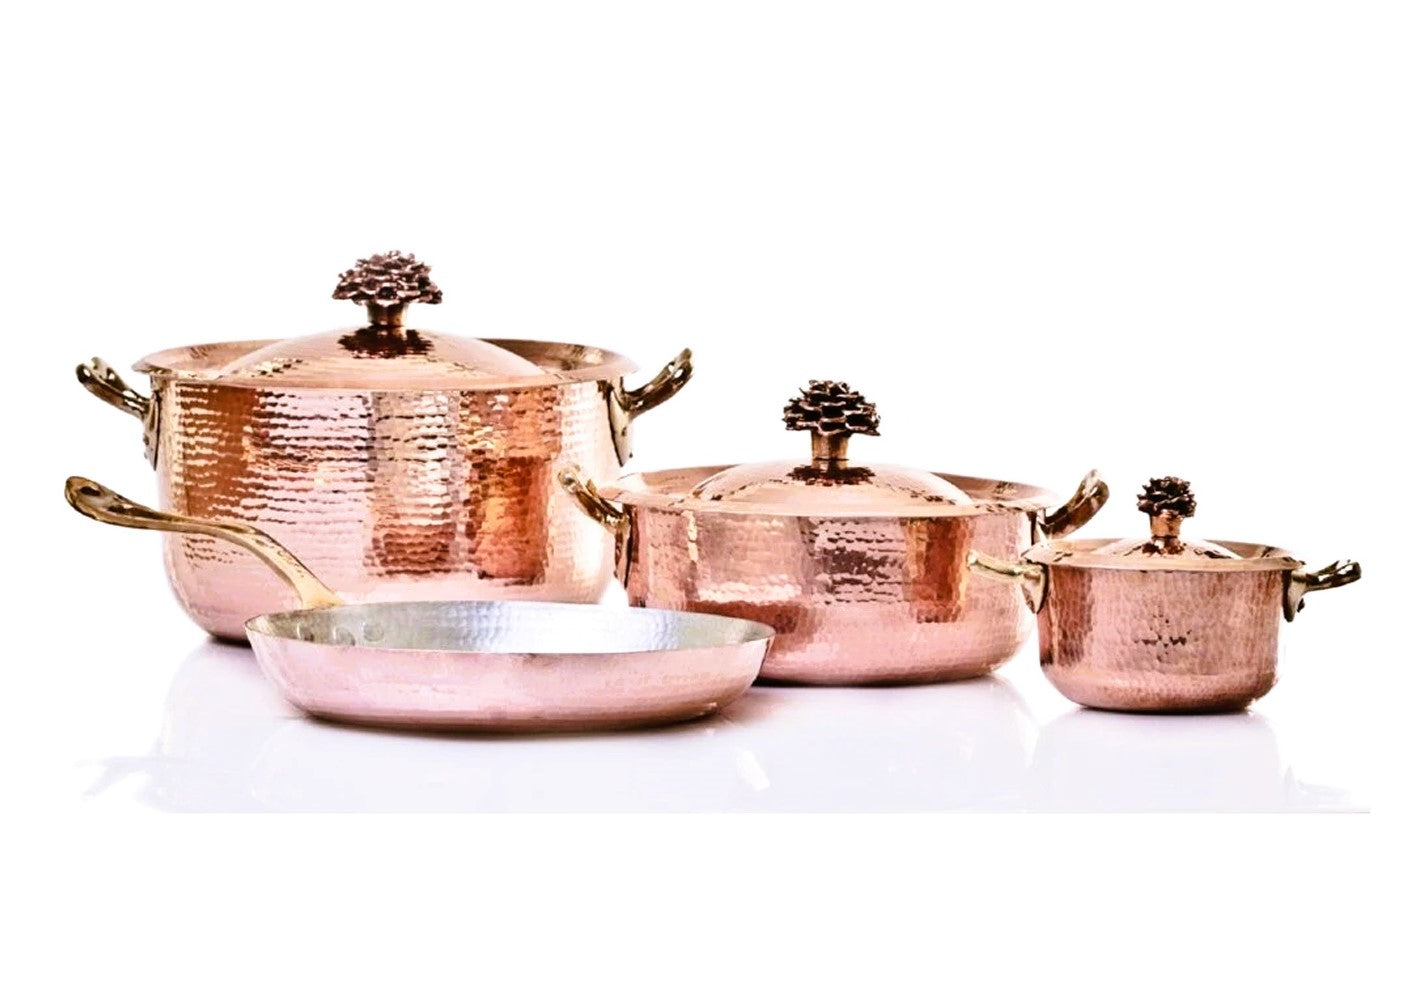 Luxury Copper Kitchen Set of 7 with Flower Lid